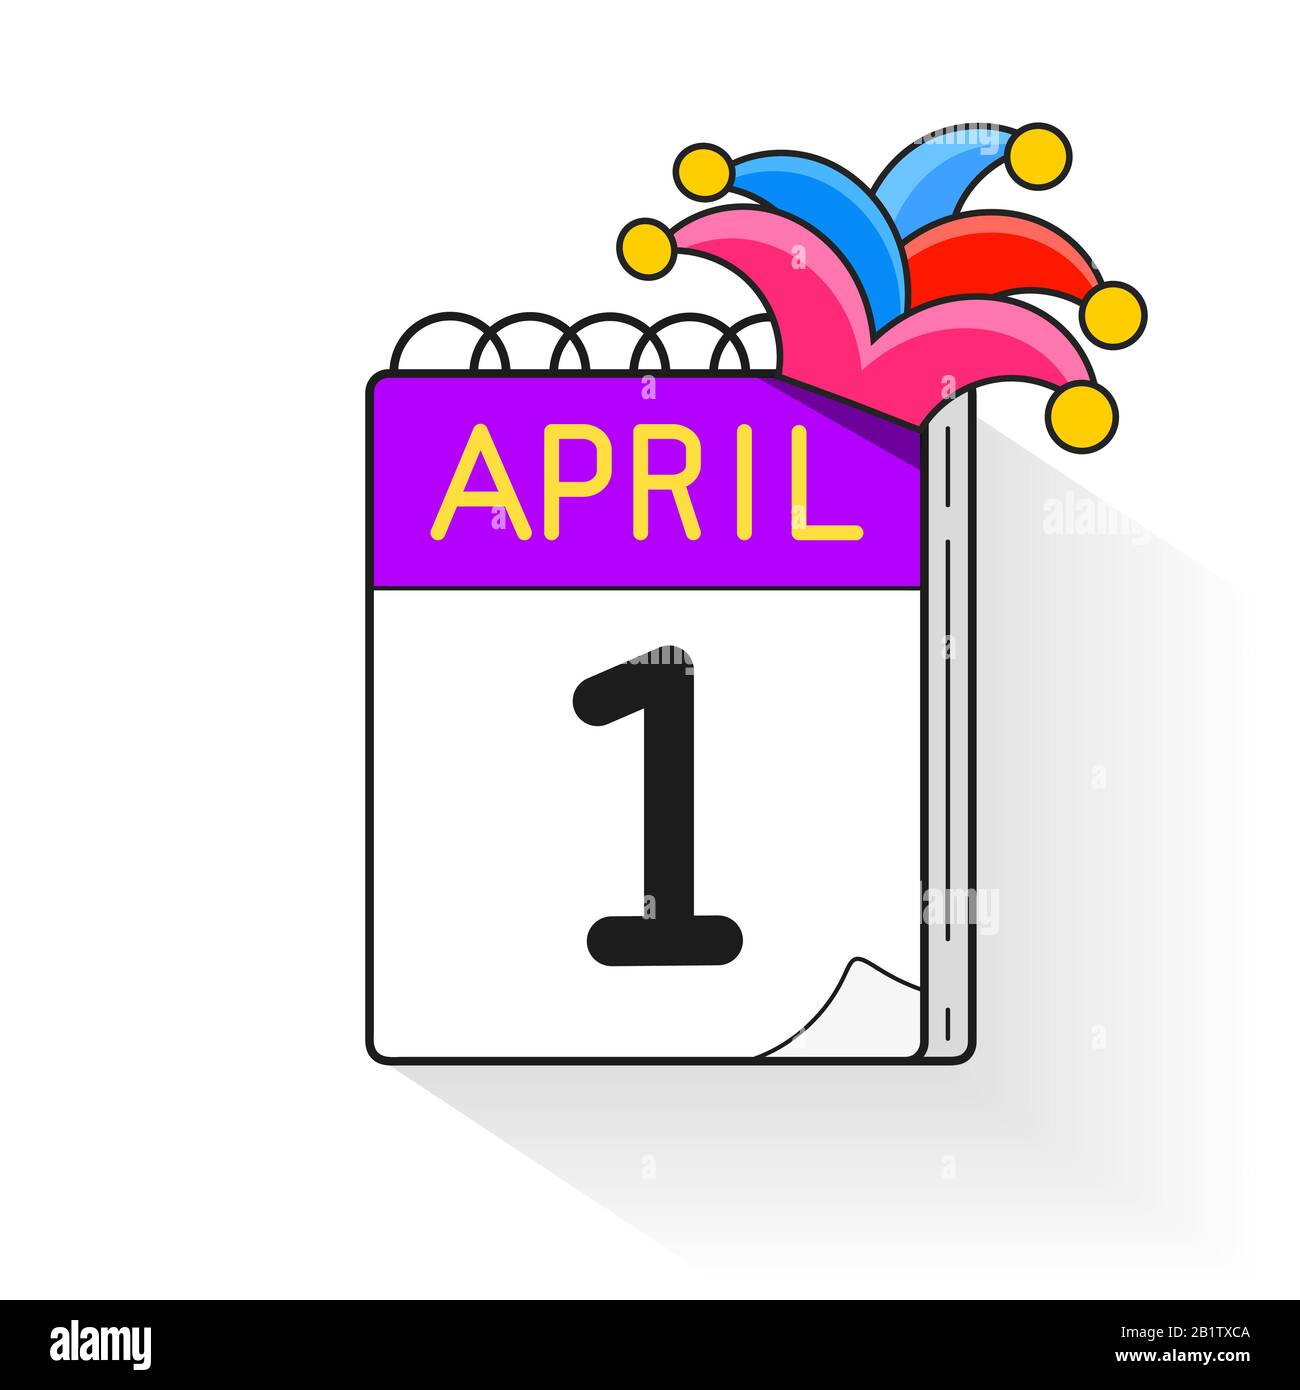 April Fools Day Is The First Of April Calendar Jokes Laughter Fools Illustration Stock 3663